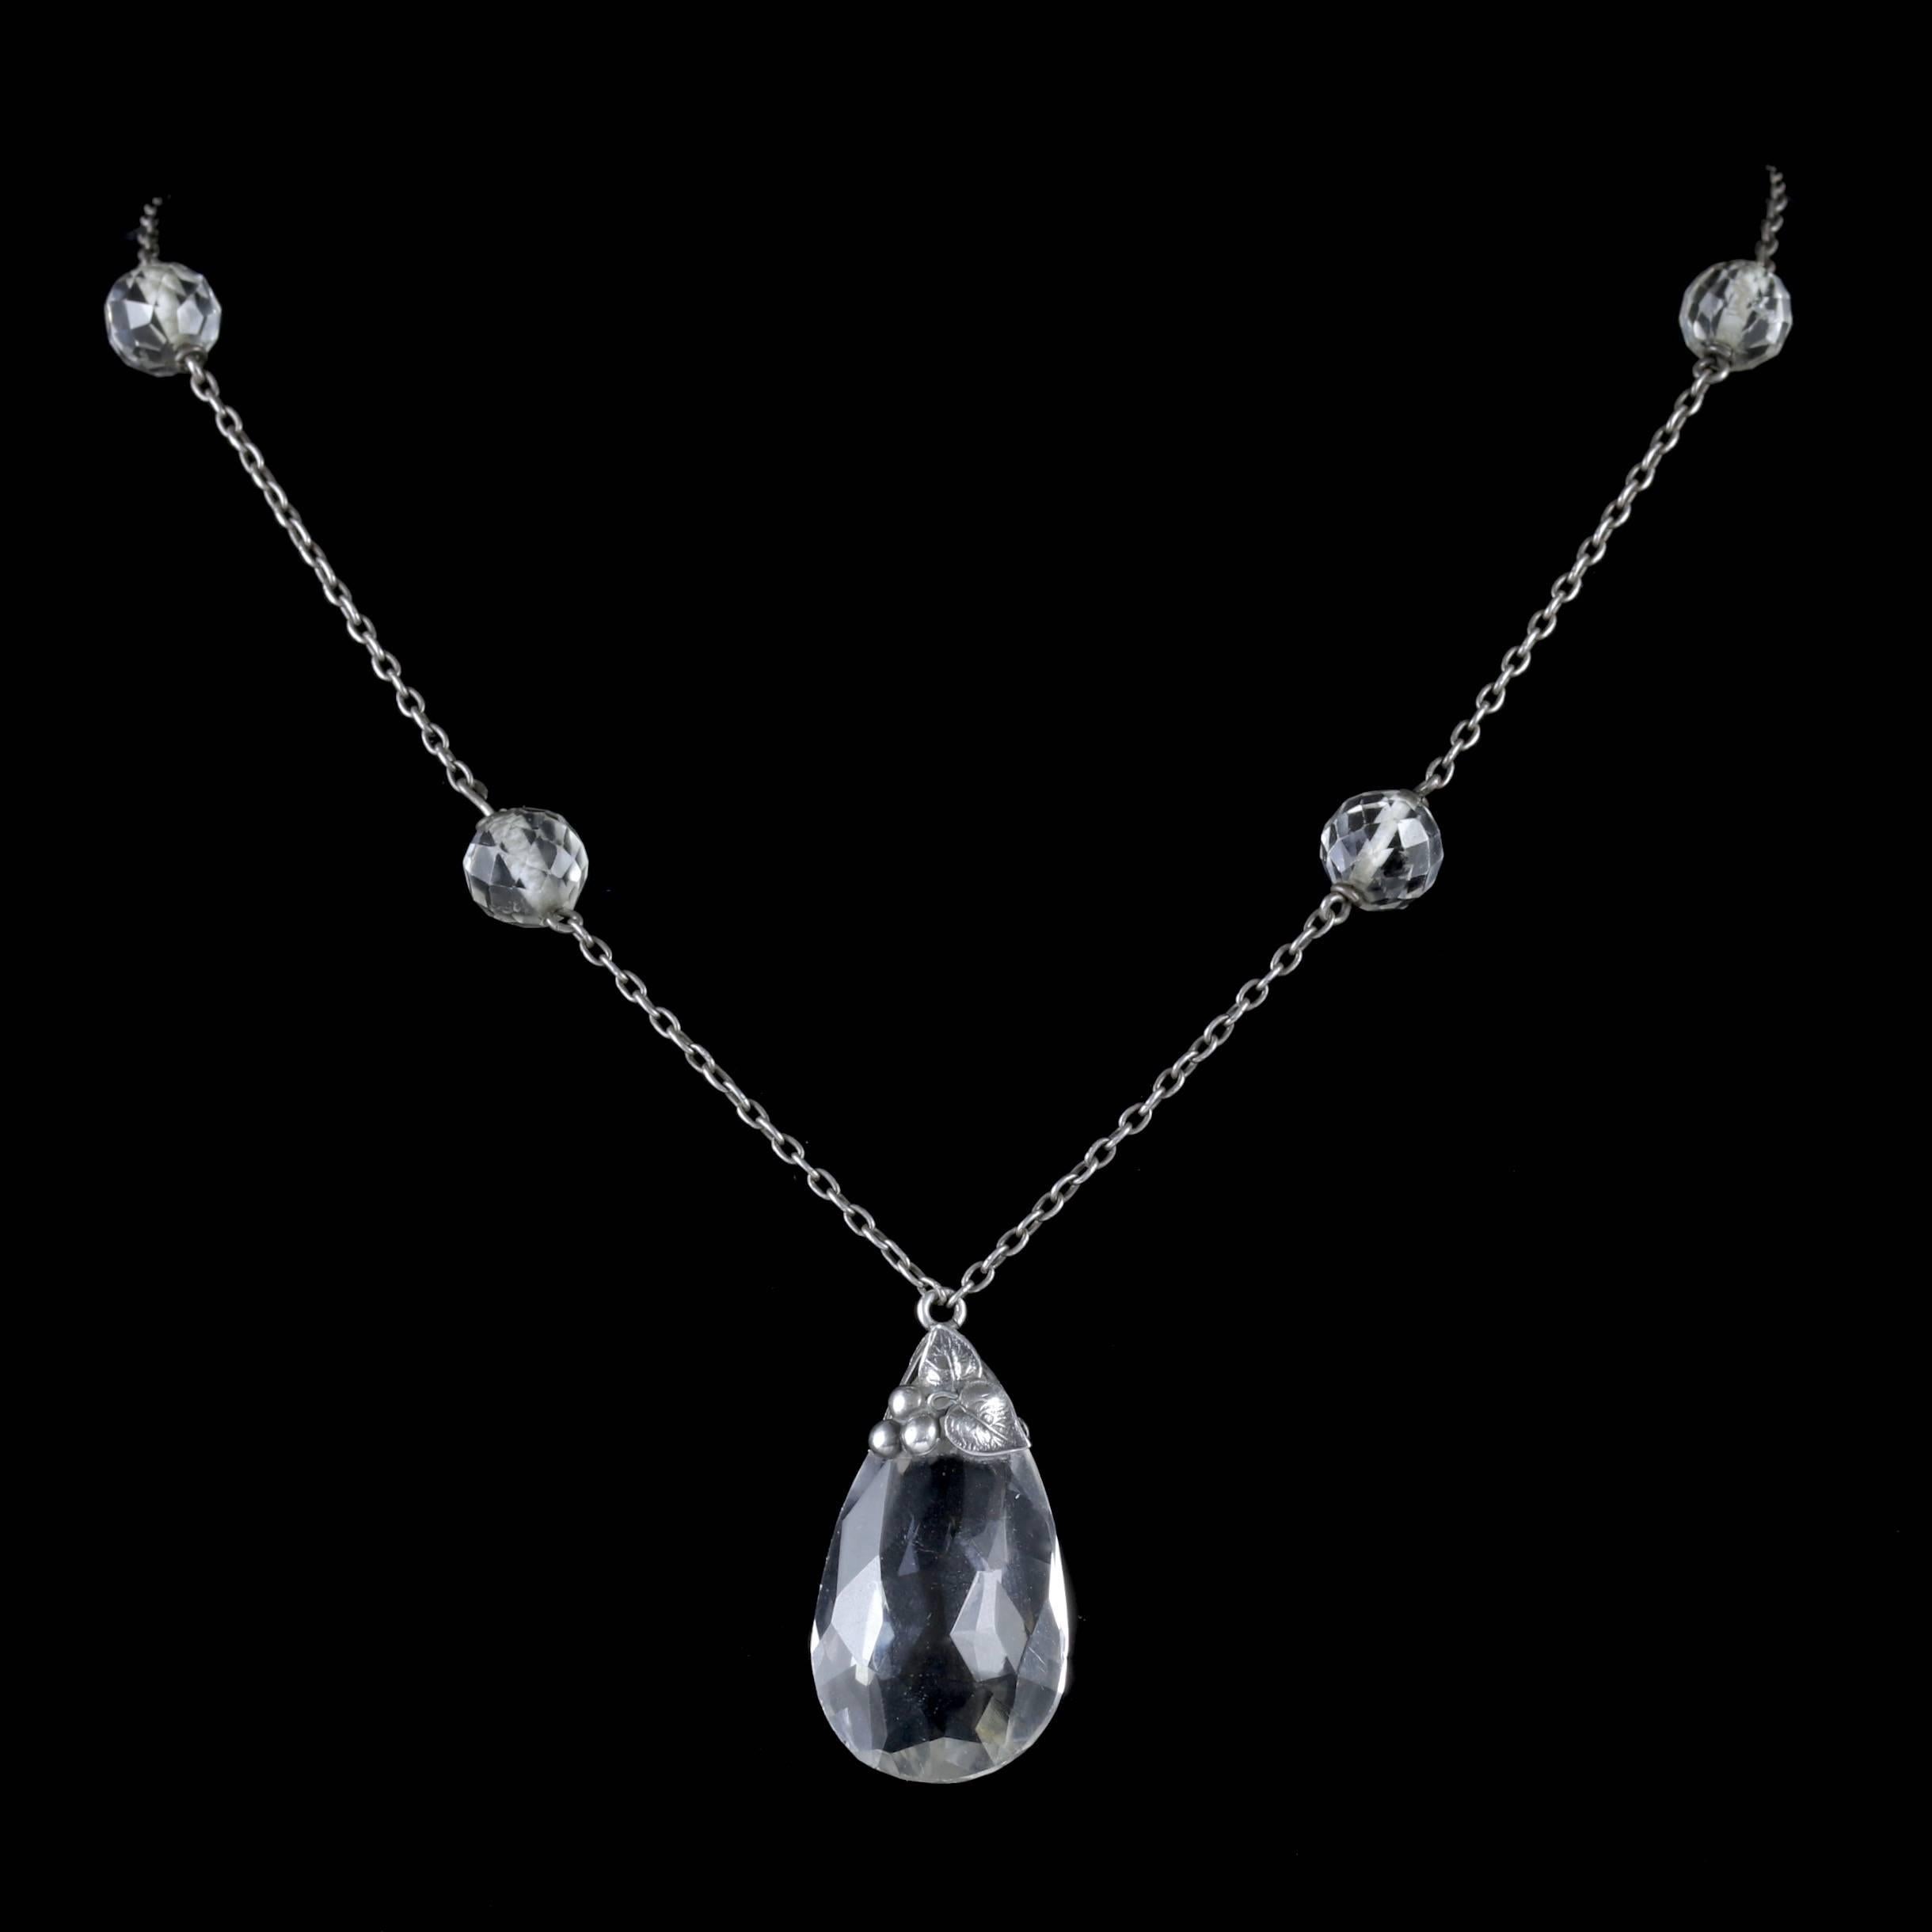 To read more please click continue reading below-

This beautiful antique Victorian Rock Crystal pendant necklace was made during the Arts and Crafts movement, Circa 1900. 

The Arts and Crafts movement breathed new life into the design of jewellery